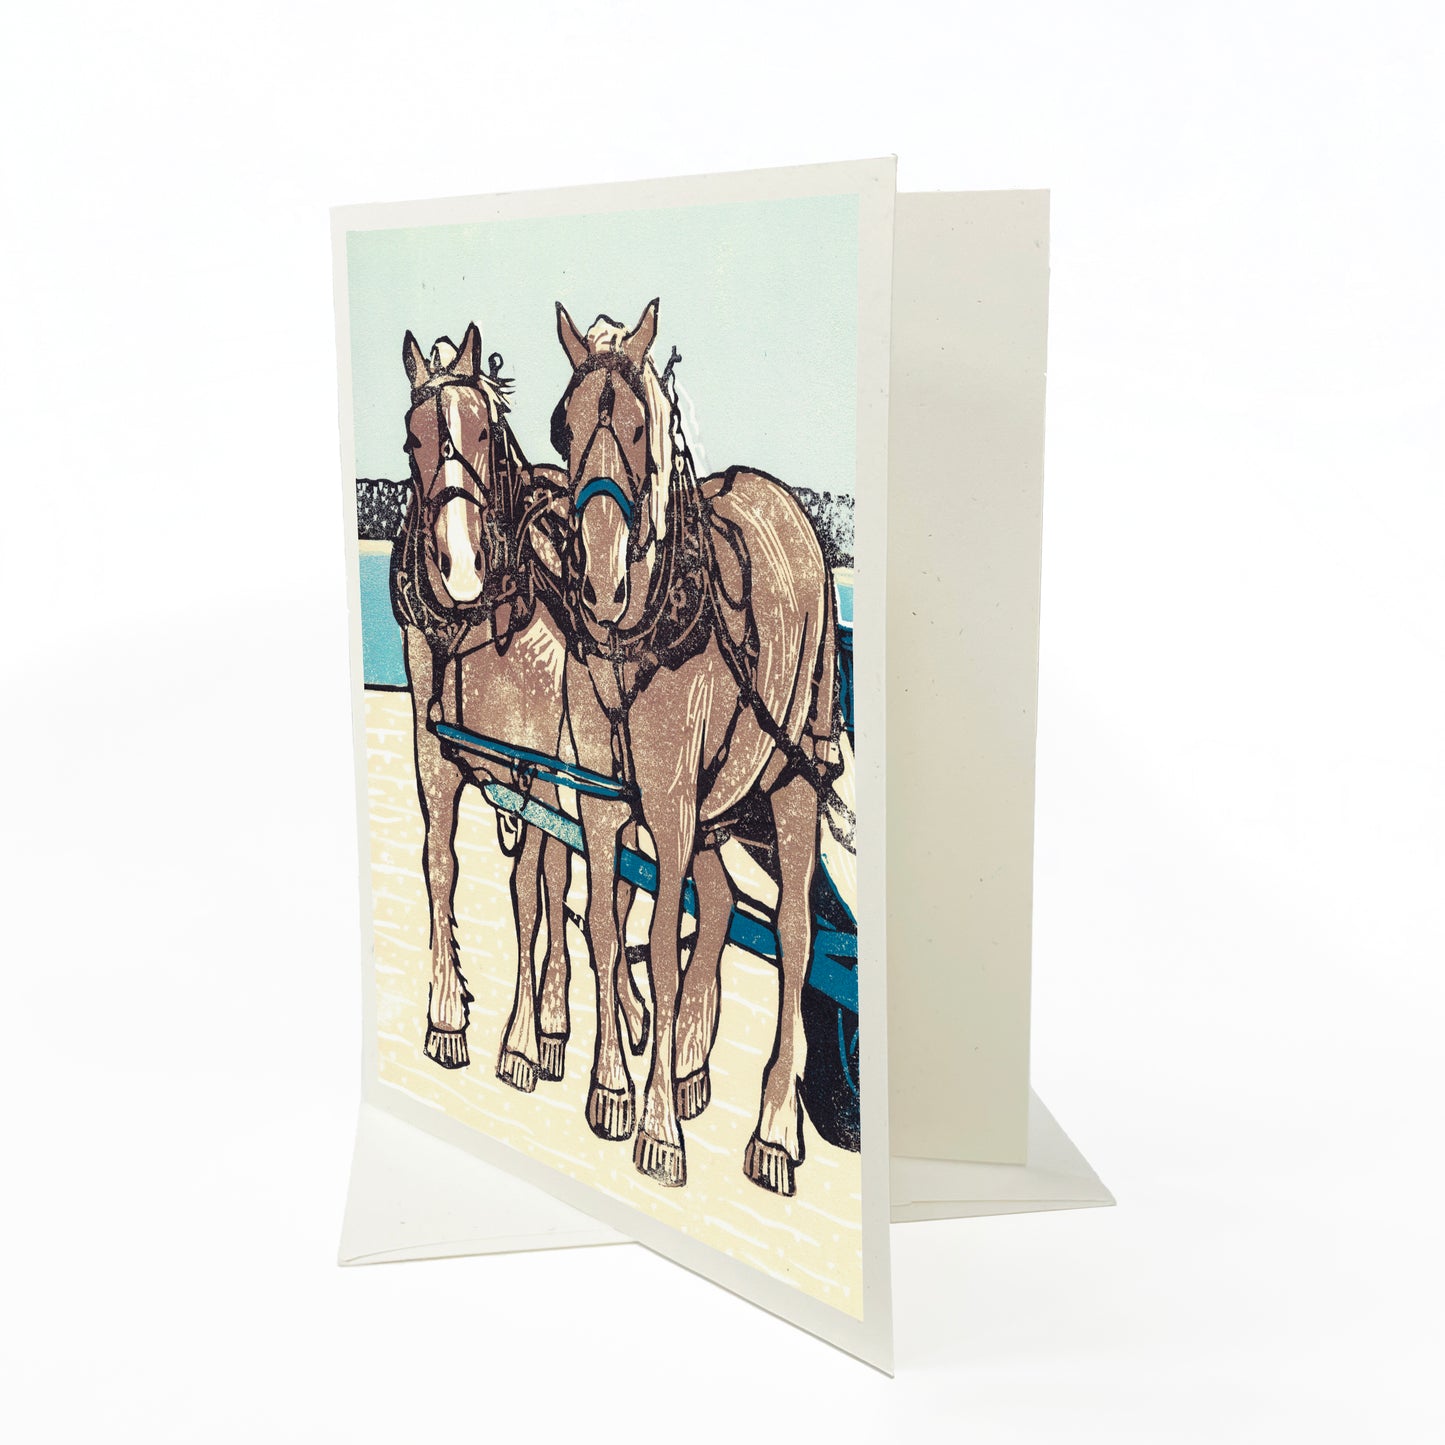 Dray Team on the Dock. A casually elegant card featuring a digital reproduction of a block print design with the same title by Natalia Wohletz of Peninsula Prints, Milford and Mackinac Island, Michigan.